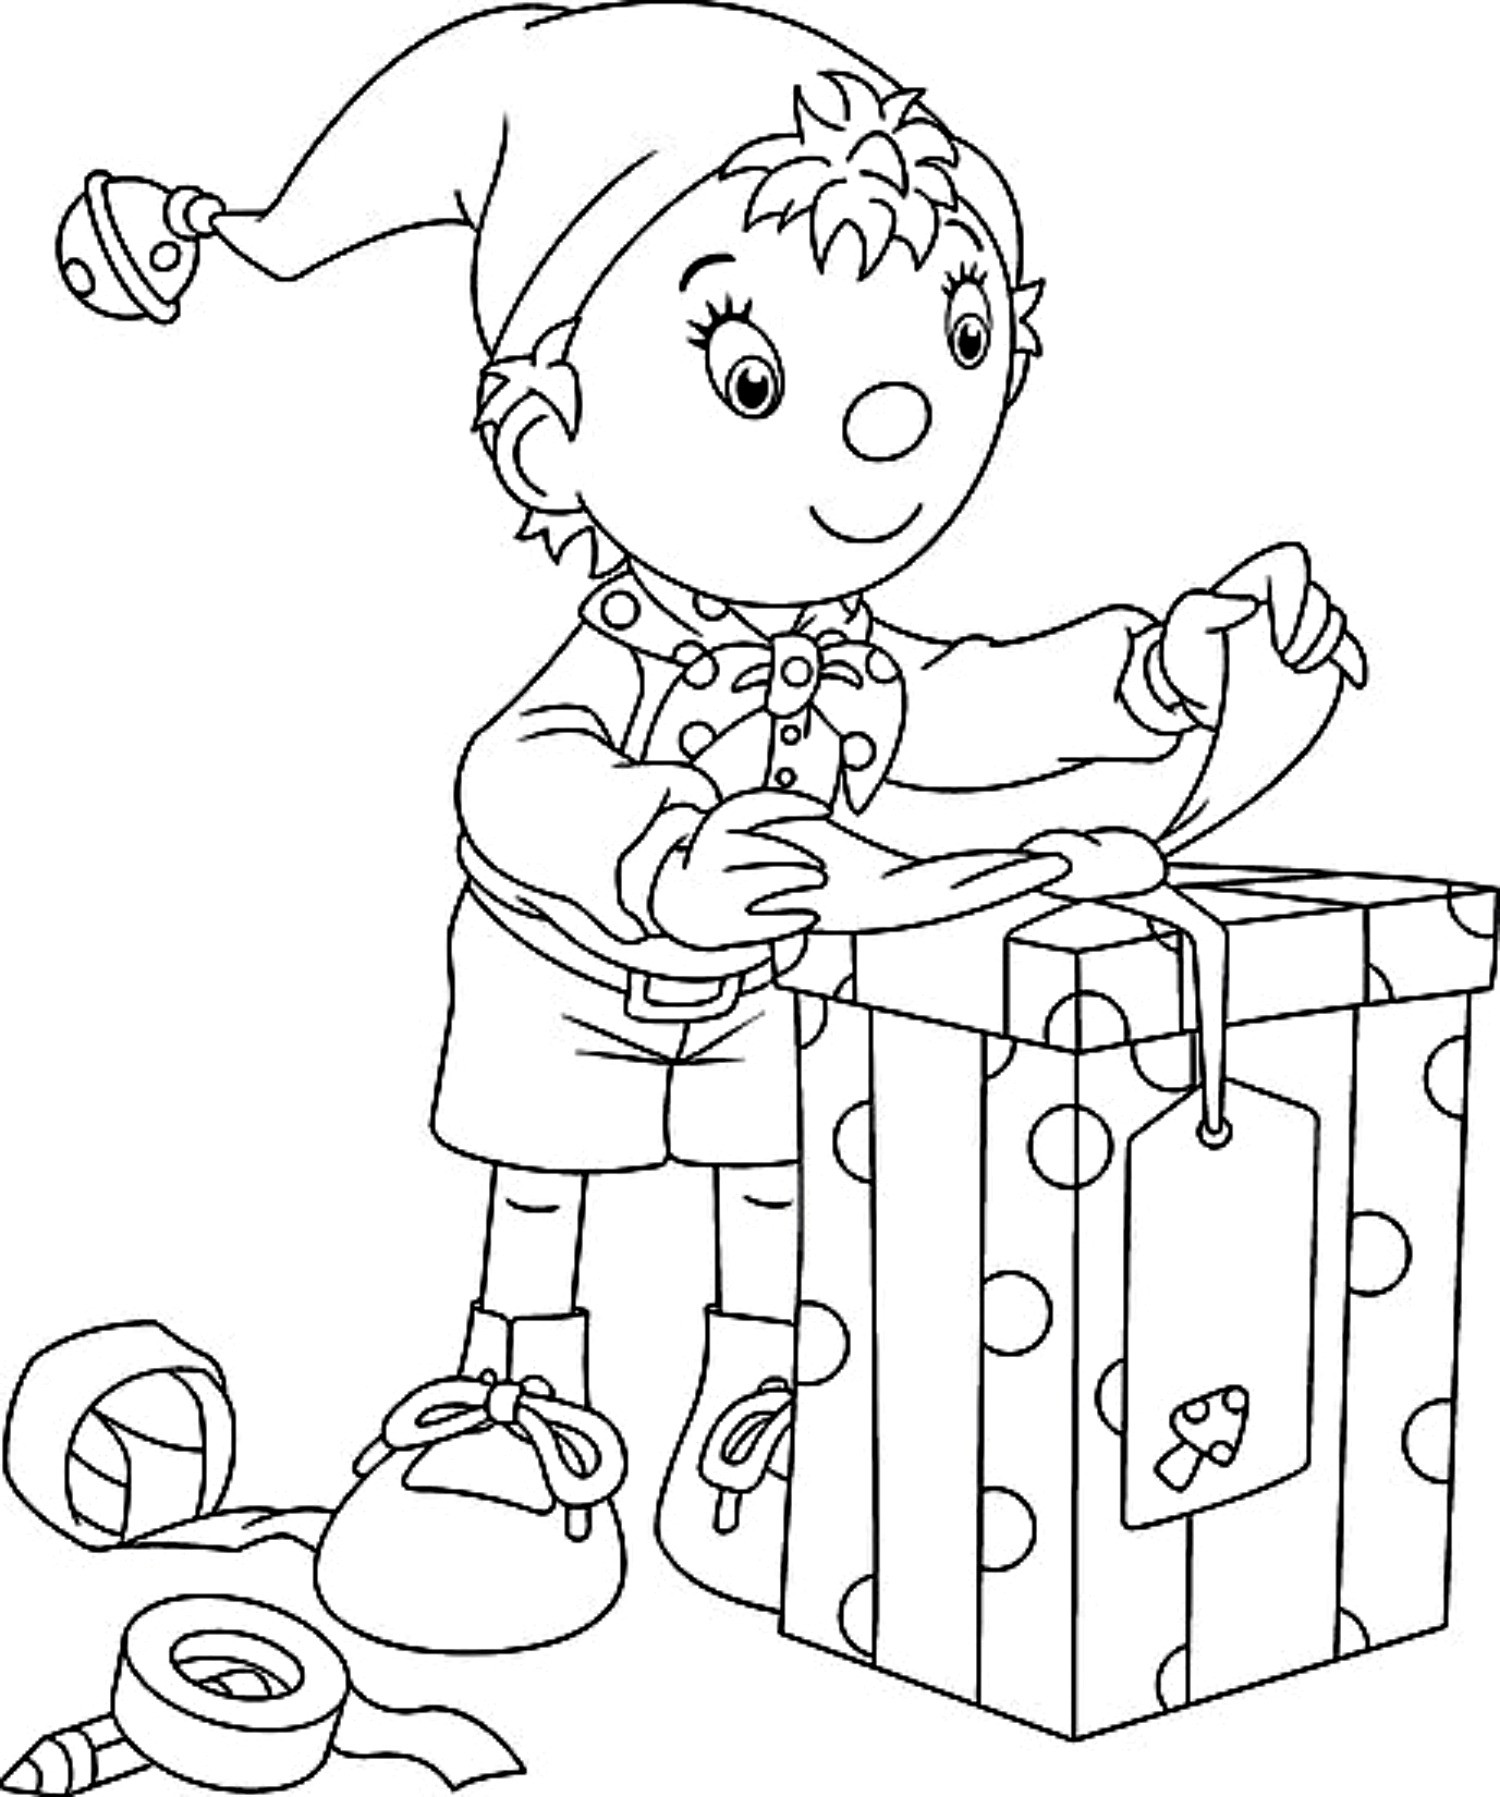 Christmas Coloring Pictures For Kids
 Free Printable Kindergarten Coloring Pages For Kids